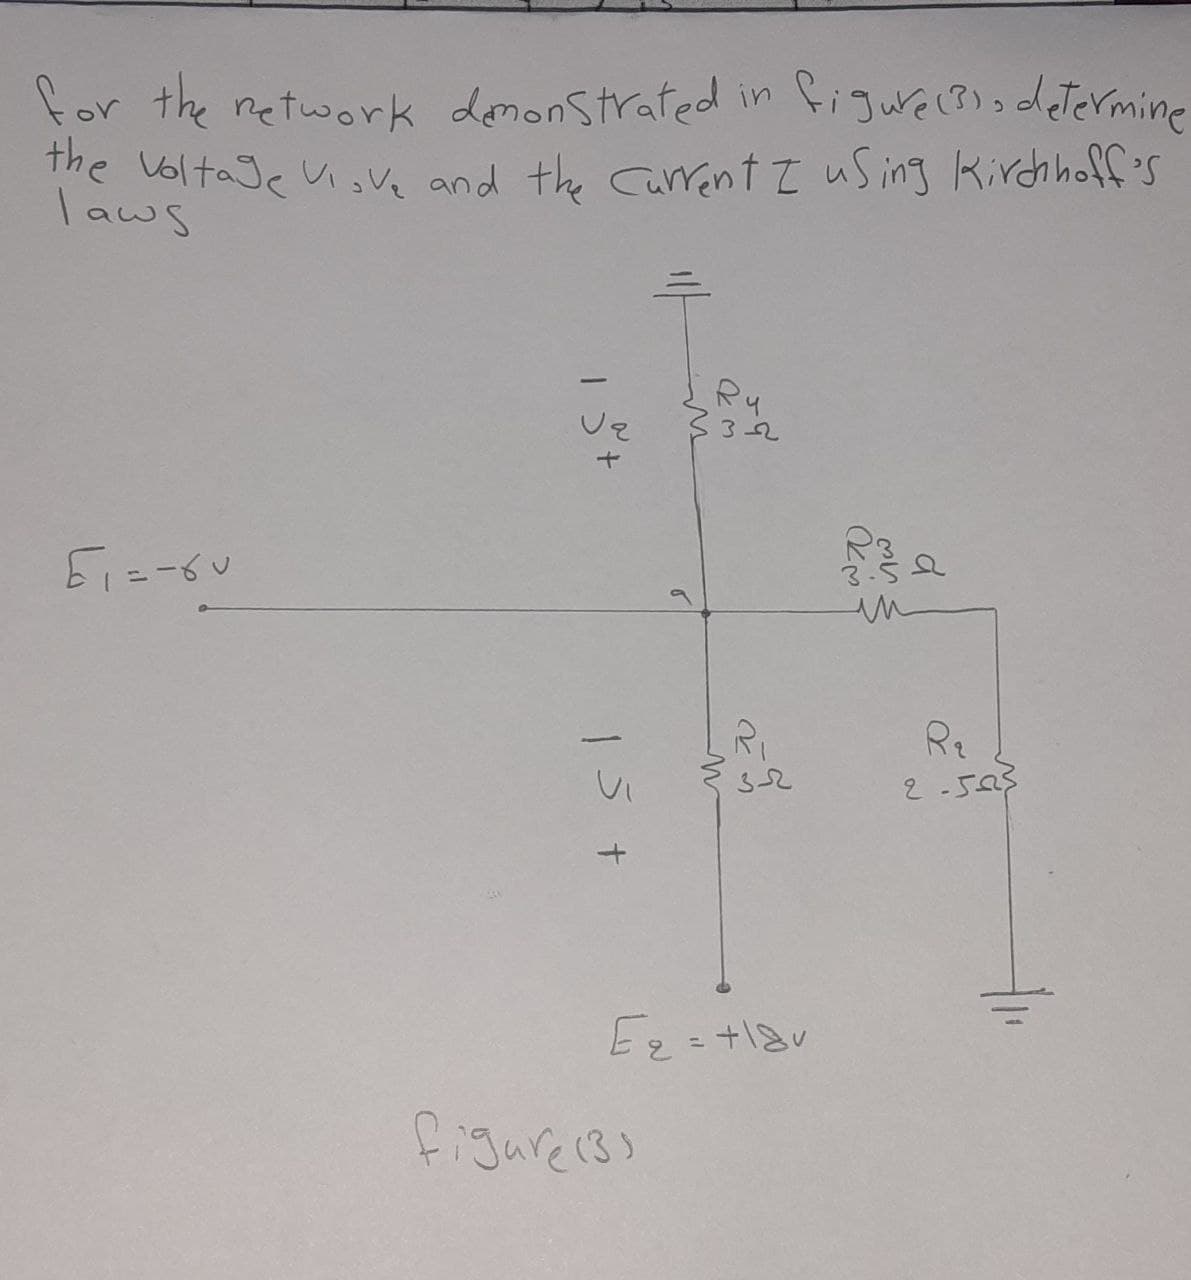 for the network demonstrated in figure (3) determine
the voltage Vive and the current I using Kirchhoff's
laws
61=-60
1
ve
15 +
>
figure (3)
Ru
33-22
R₁
3-2
E₂=+18v
in
R₂
2-5025